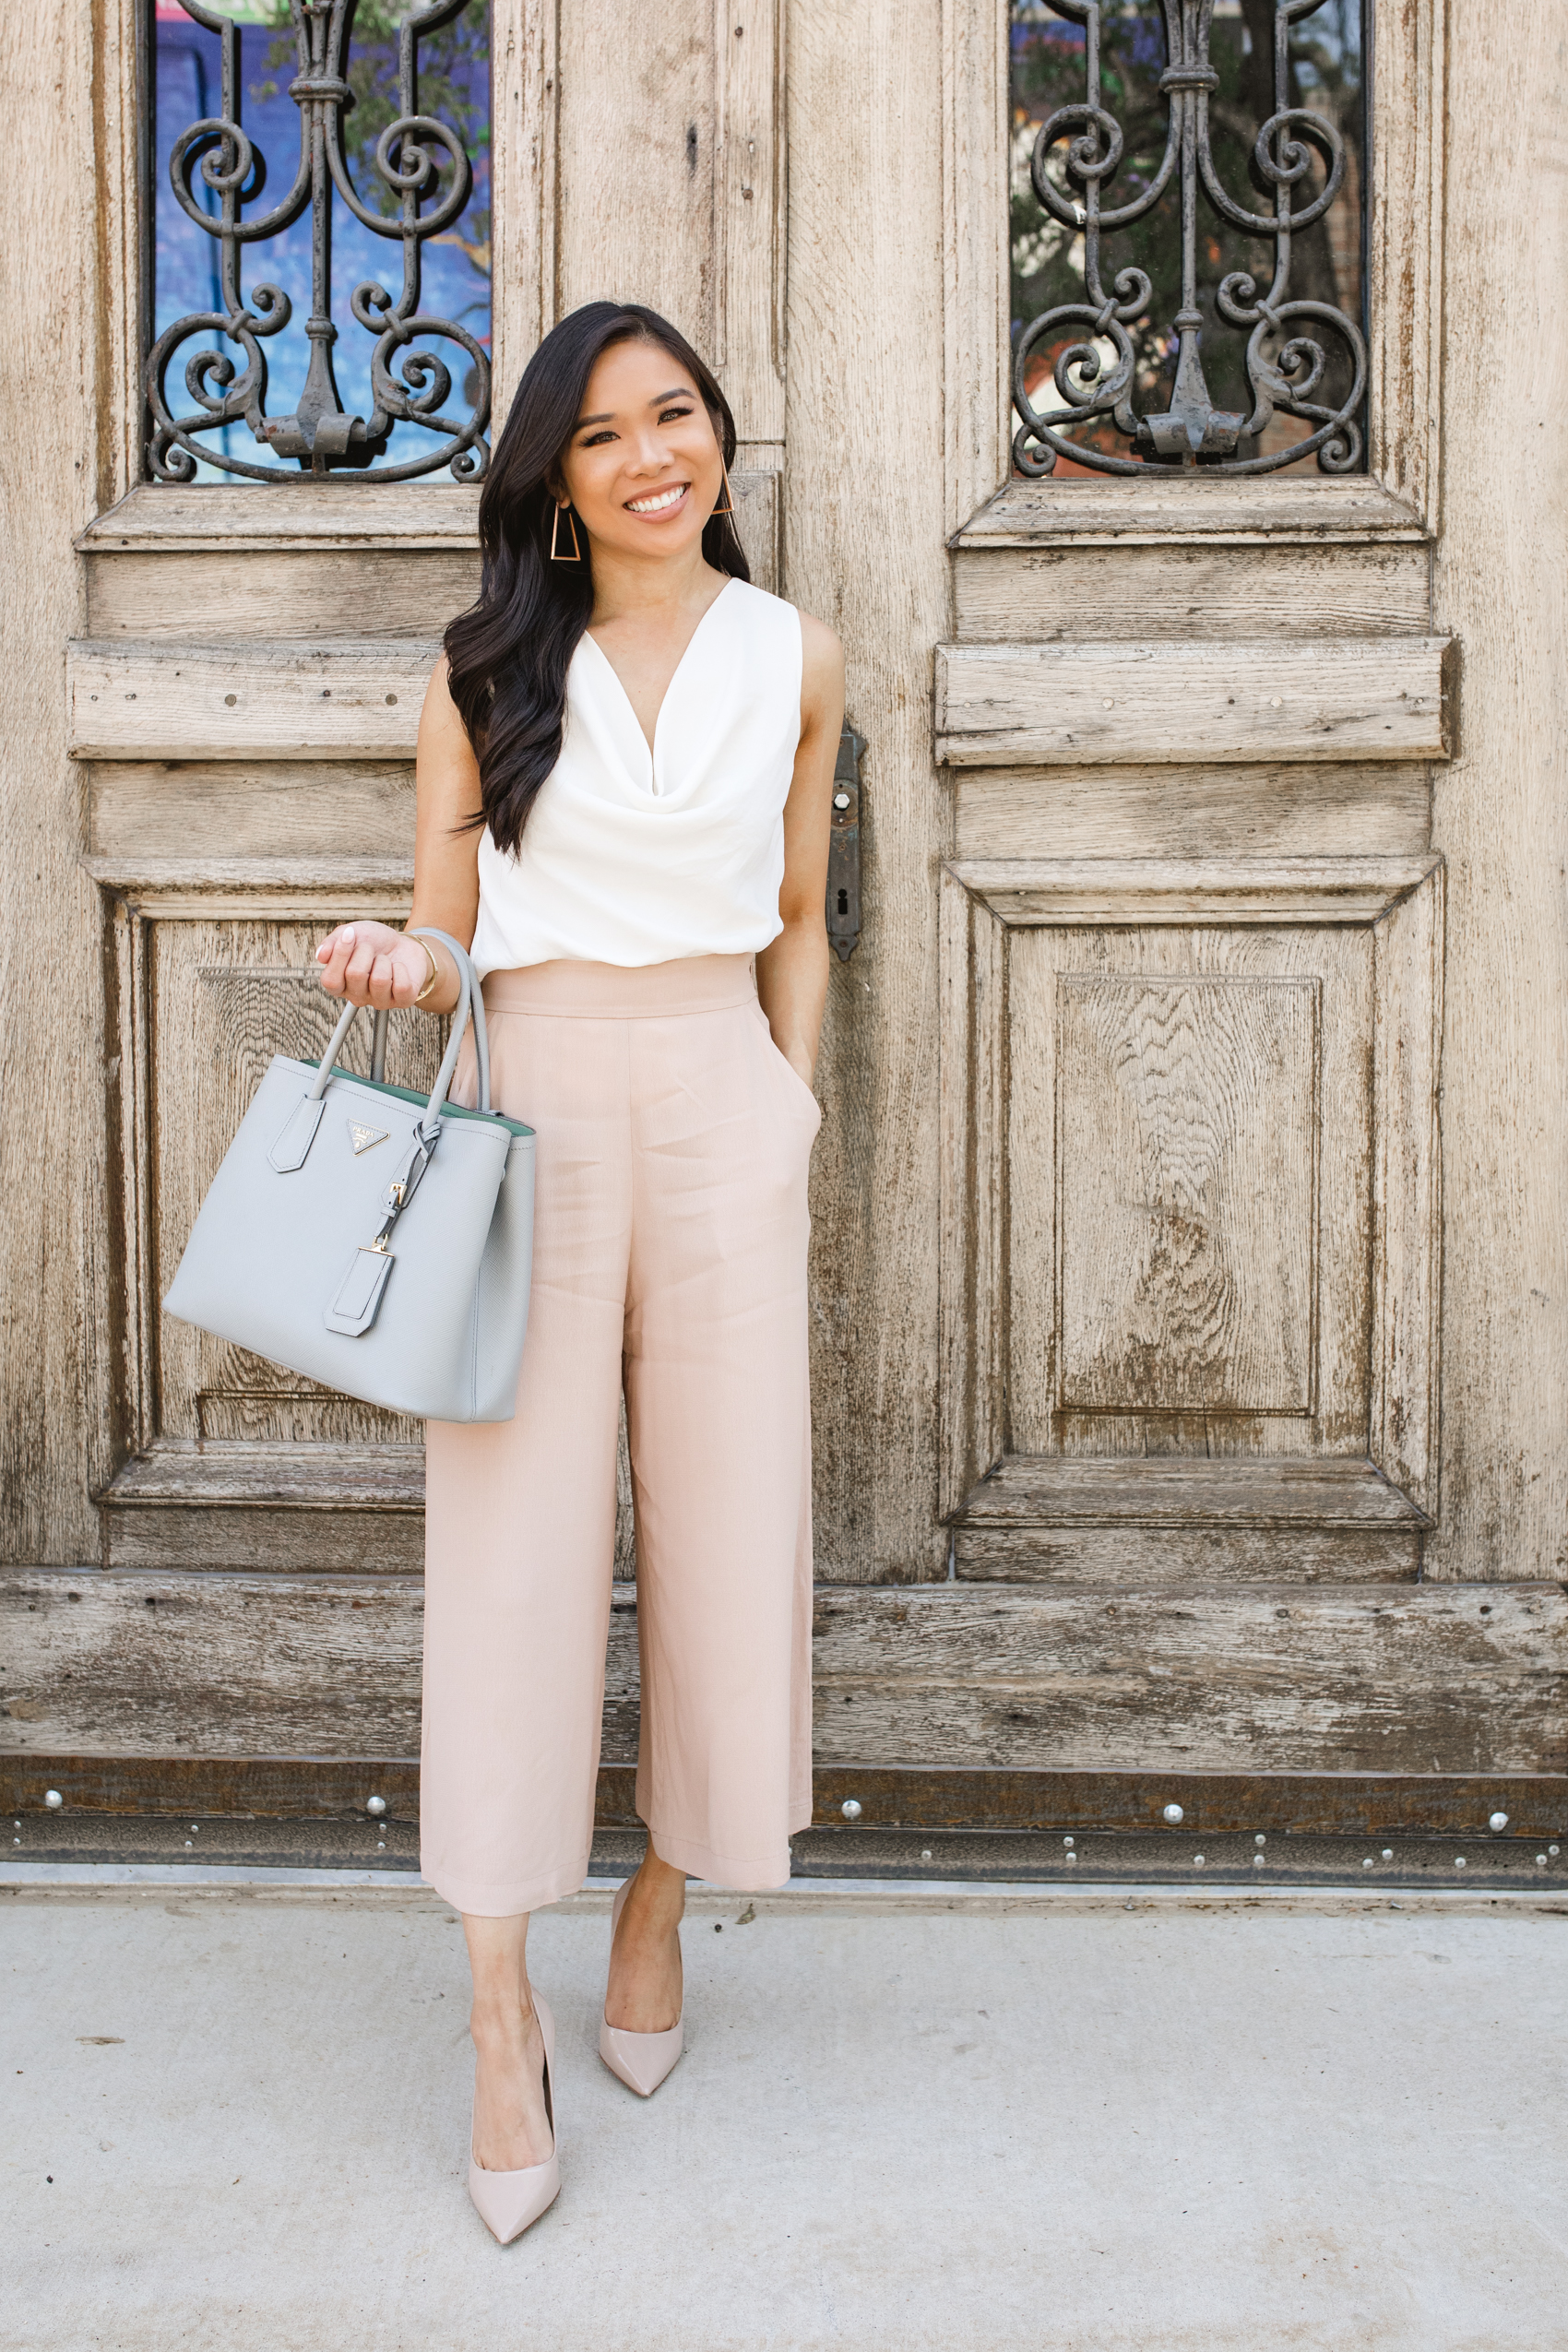 Workwear outfit inspo with nude wide-leg cropped pants, white blouse and nude heels